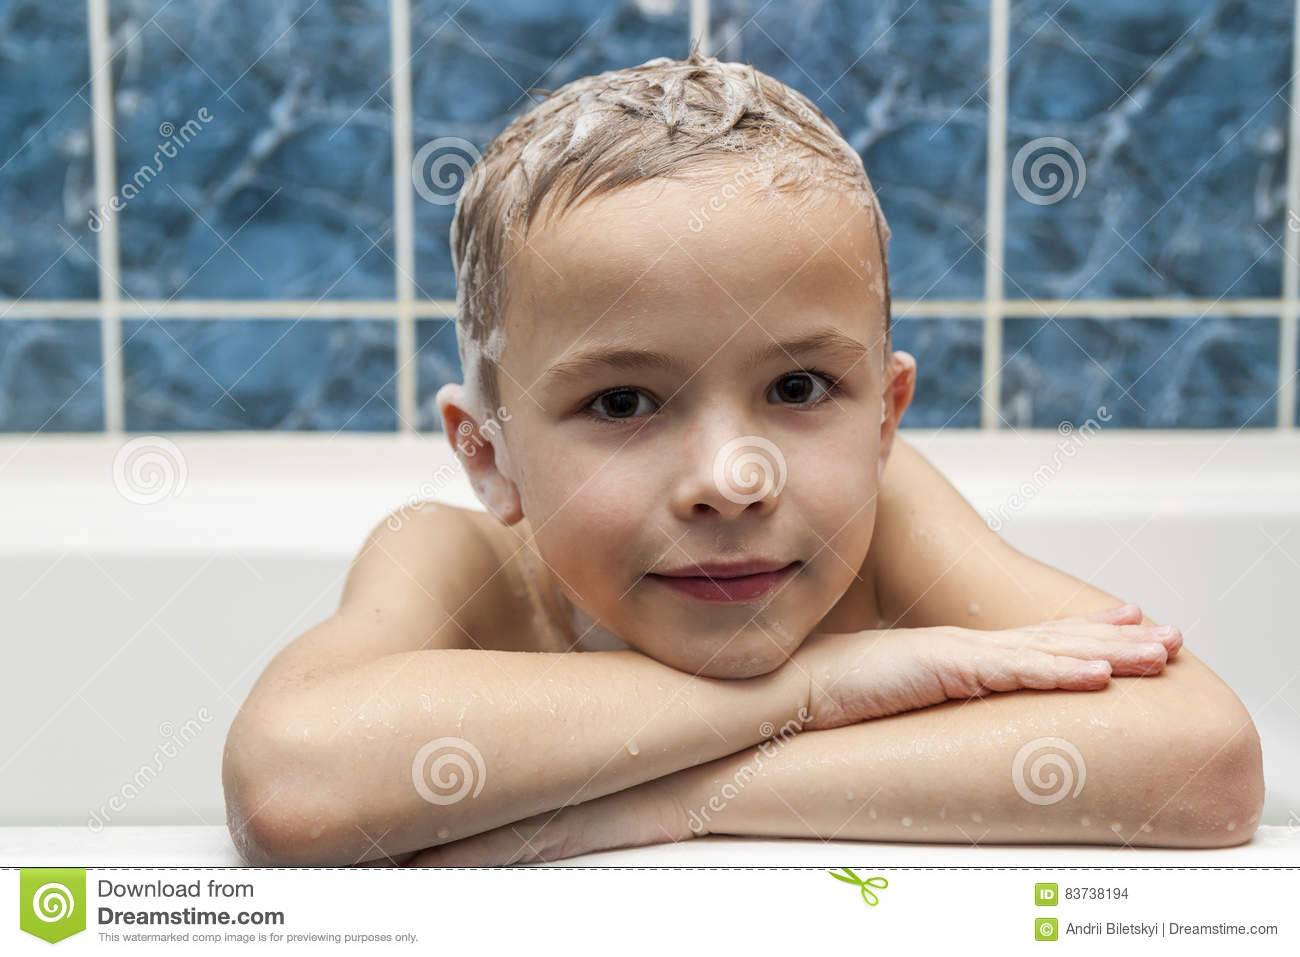 Baby Boy Hair Products
 Adorable Baby Boy With Shampoo Soap Suds Hair Taking